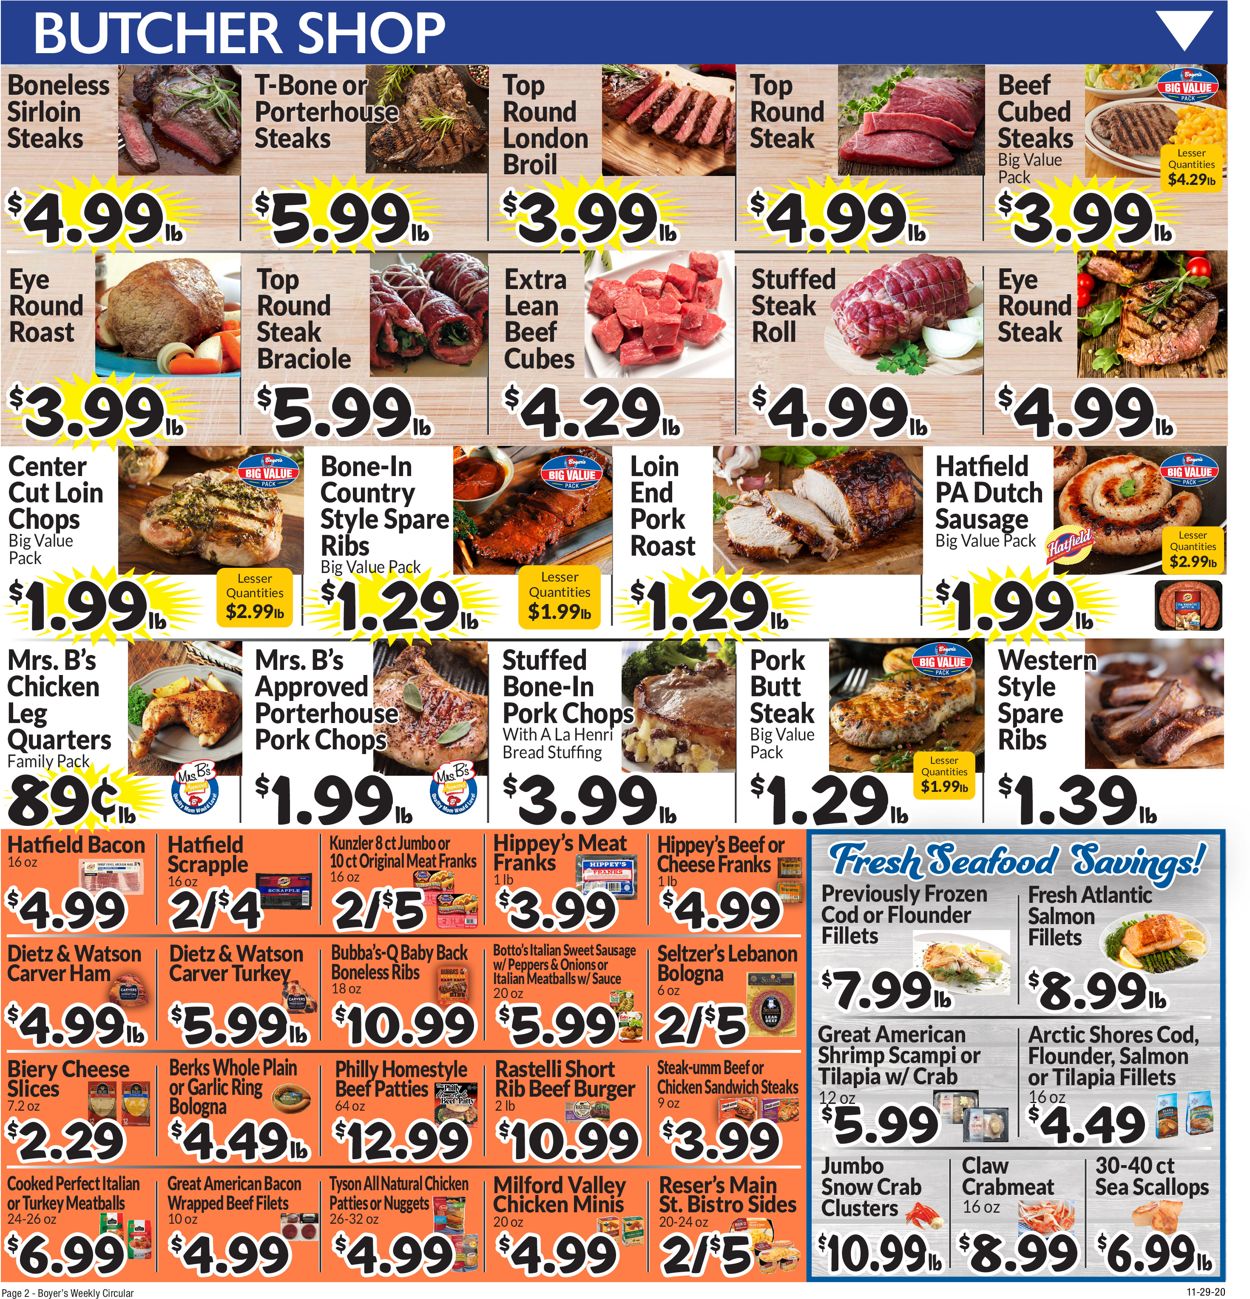 Boyer's Food Markets - Cyber Monday 2020 Weekly Ad Circular - valid 11/29-12/05/2020 (Page 4)